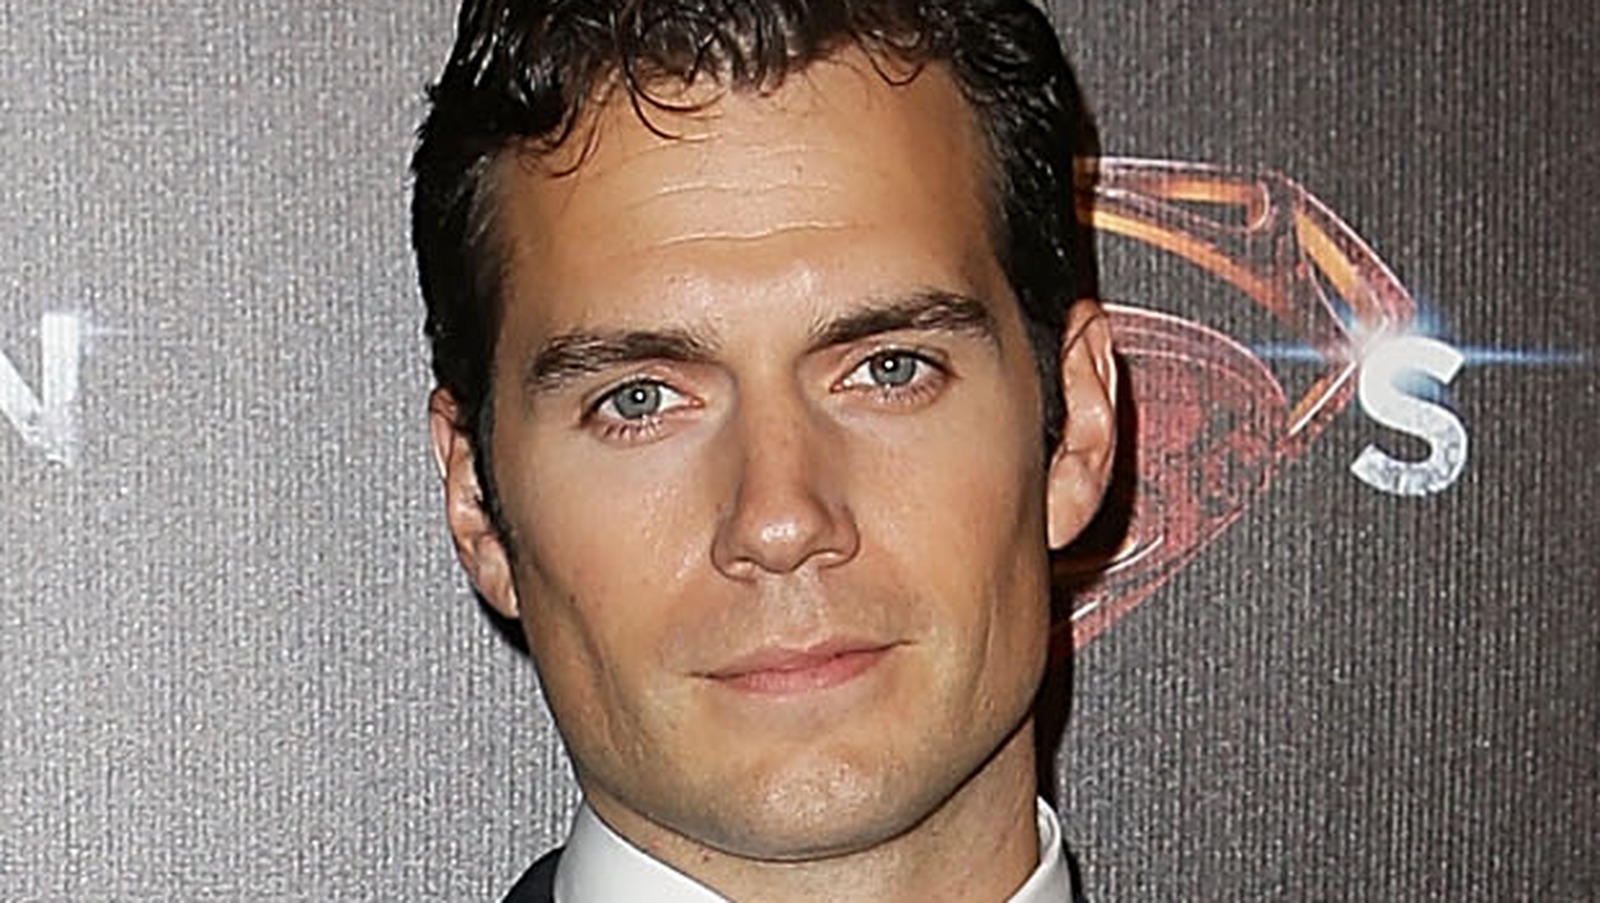 About Henry Cavill's Brothers - From Oldest to Youngest